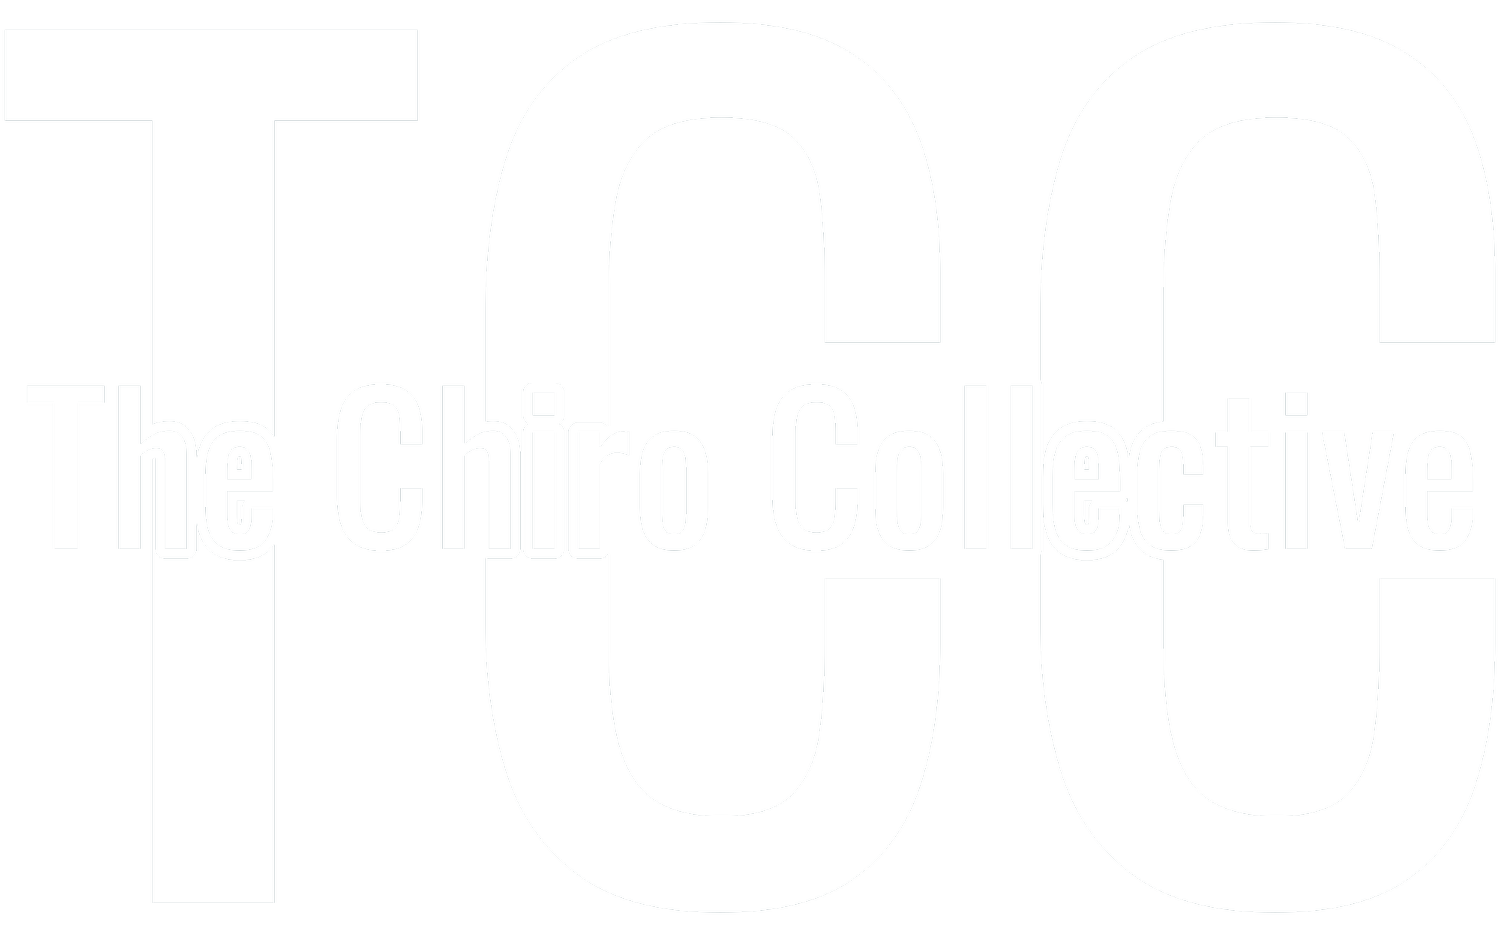 The Chiro Collective